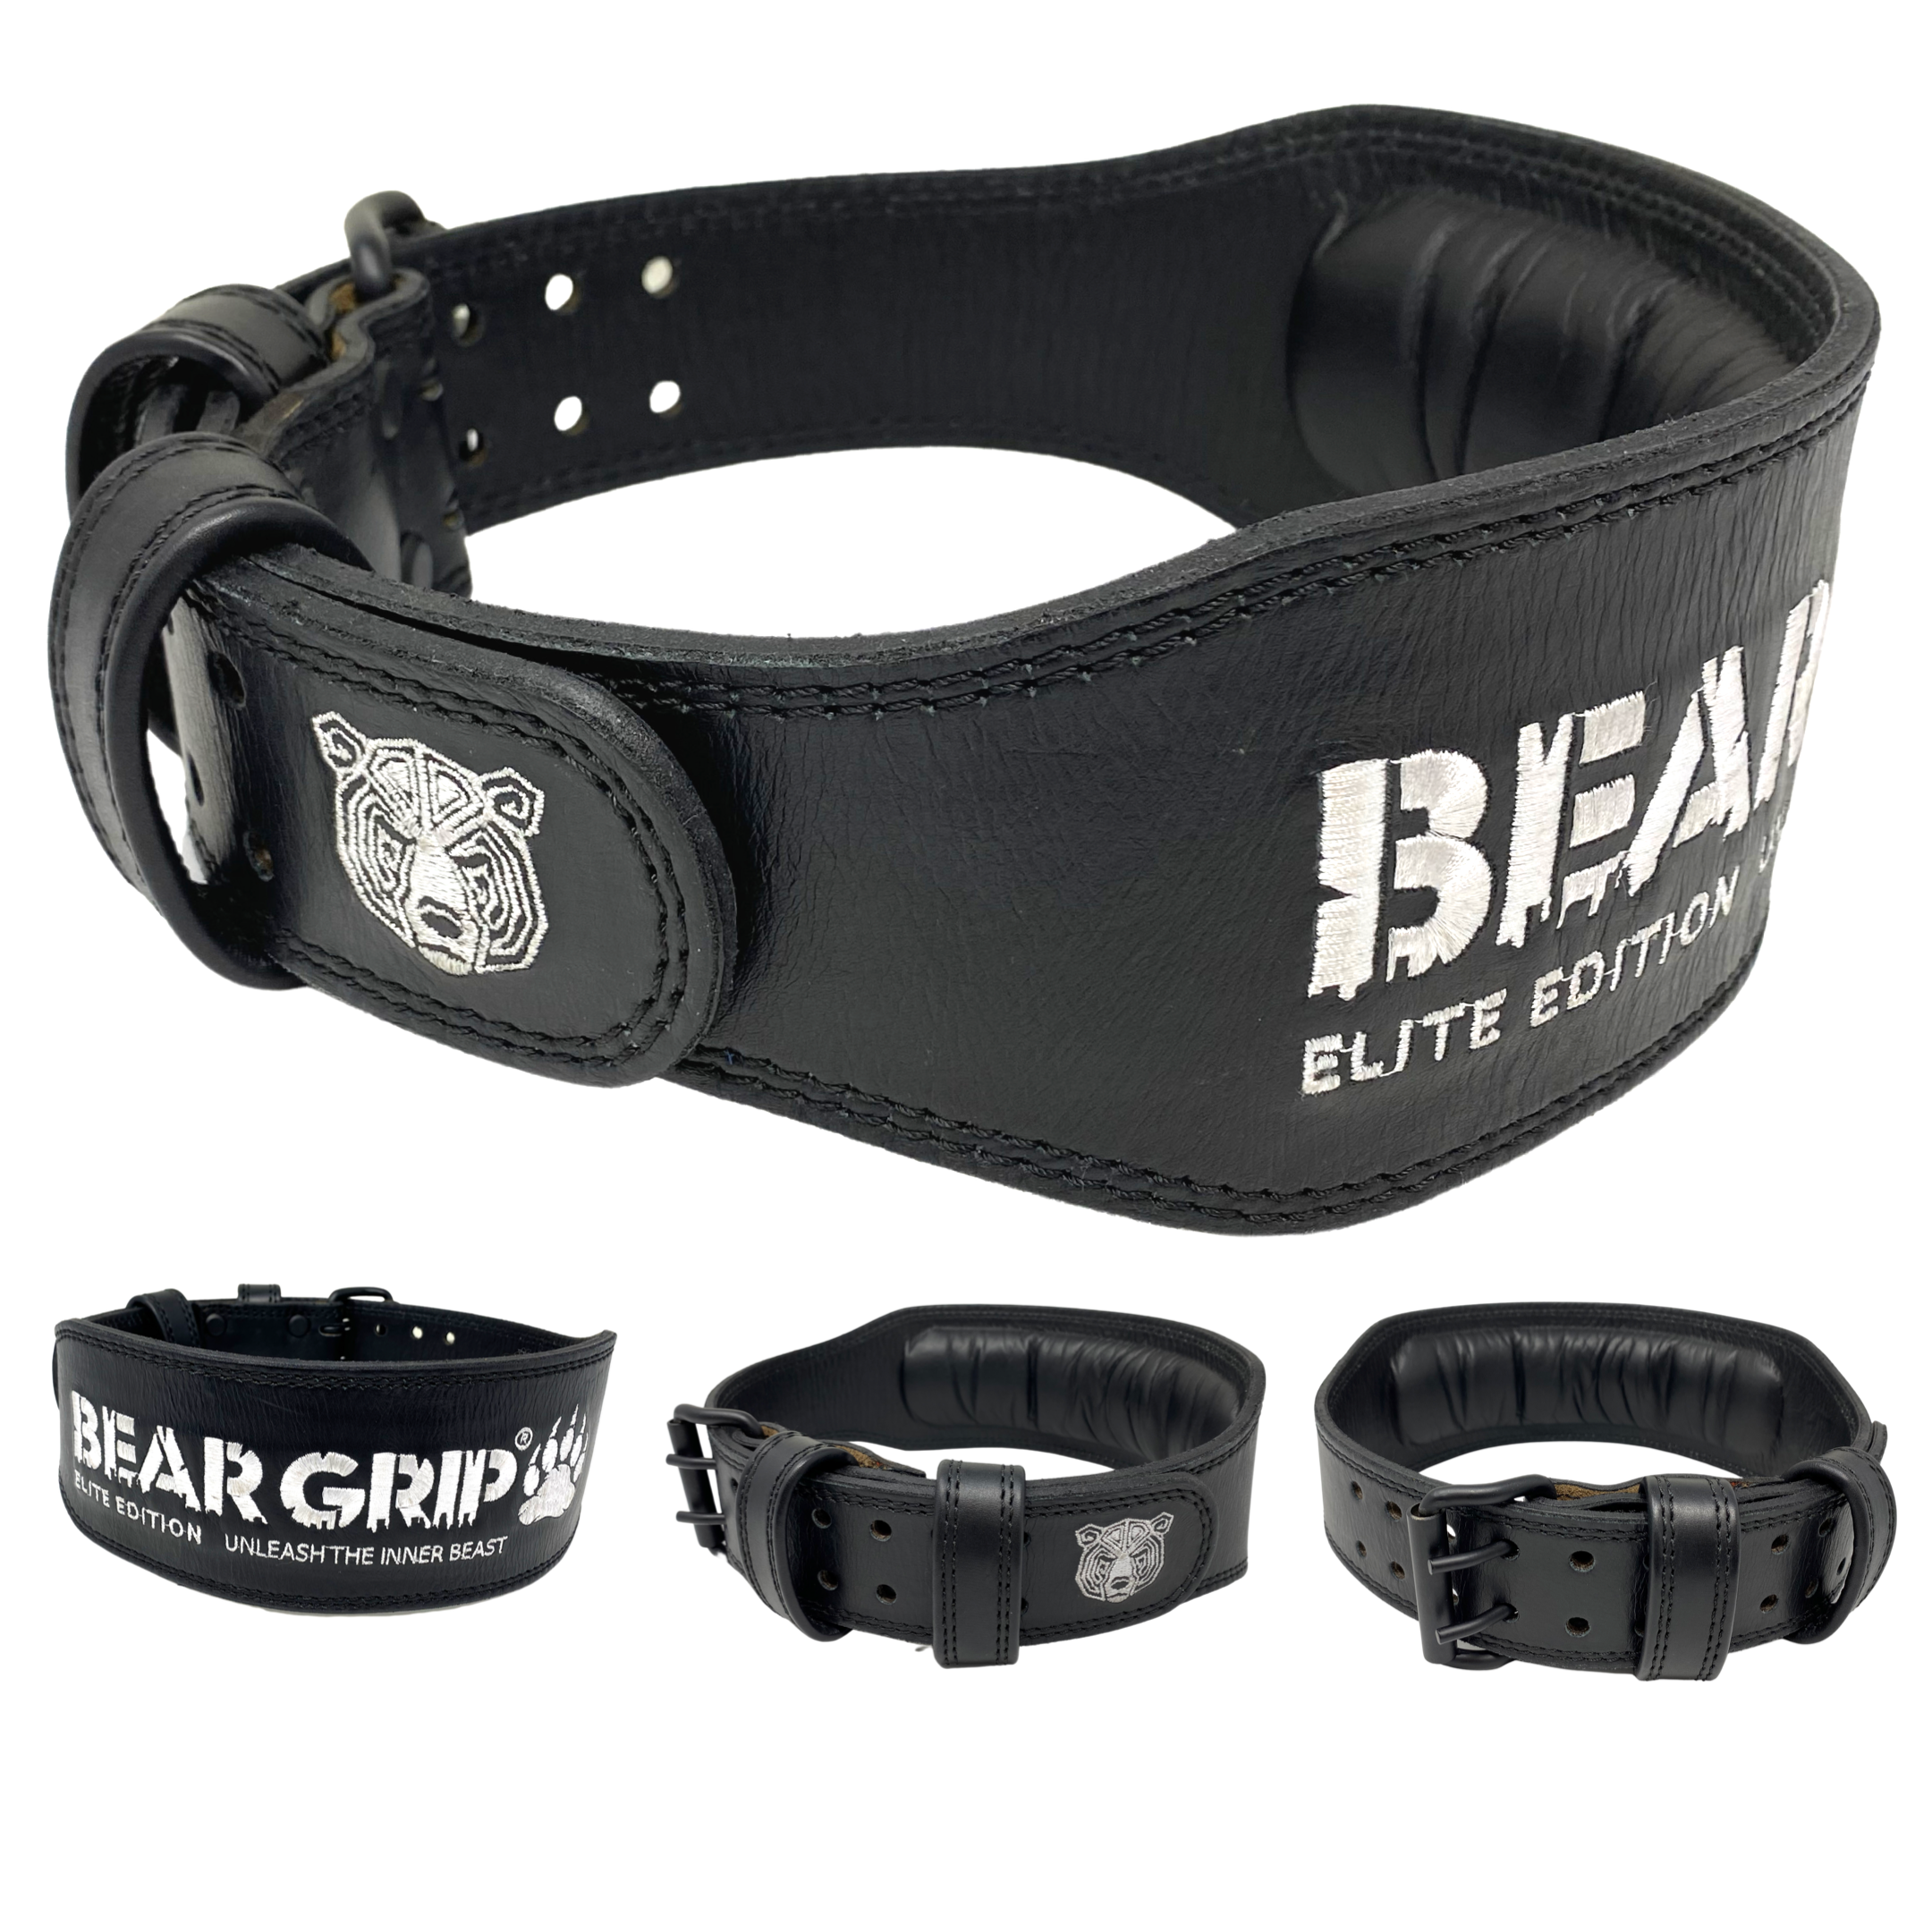 BEAR GRIP BLACK FRIDAY - Double Sided Premium Leather Weight Lifting Belt